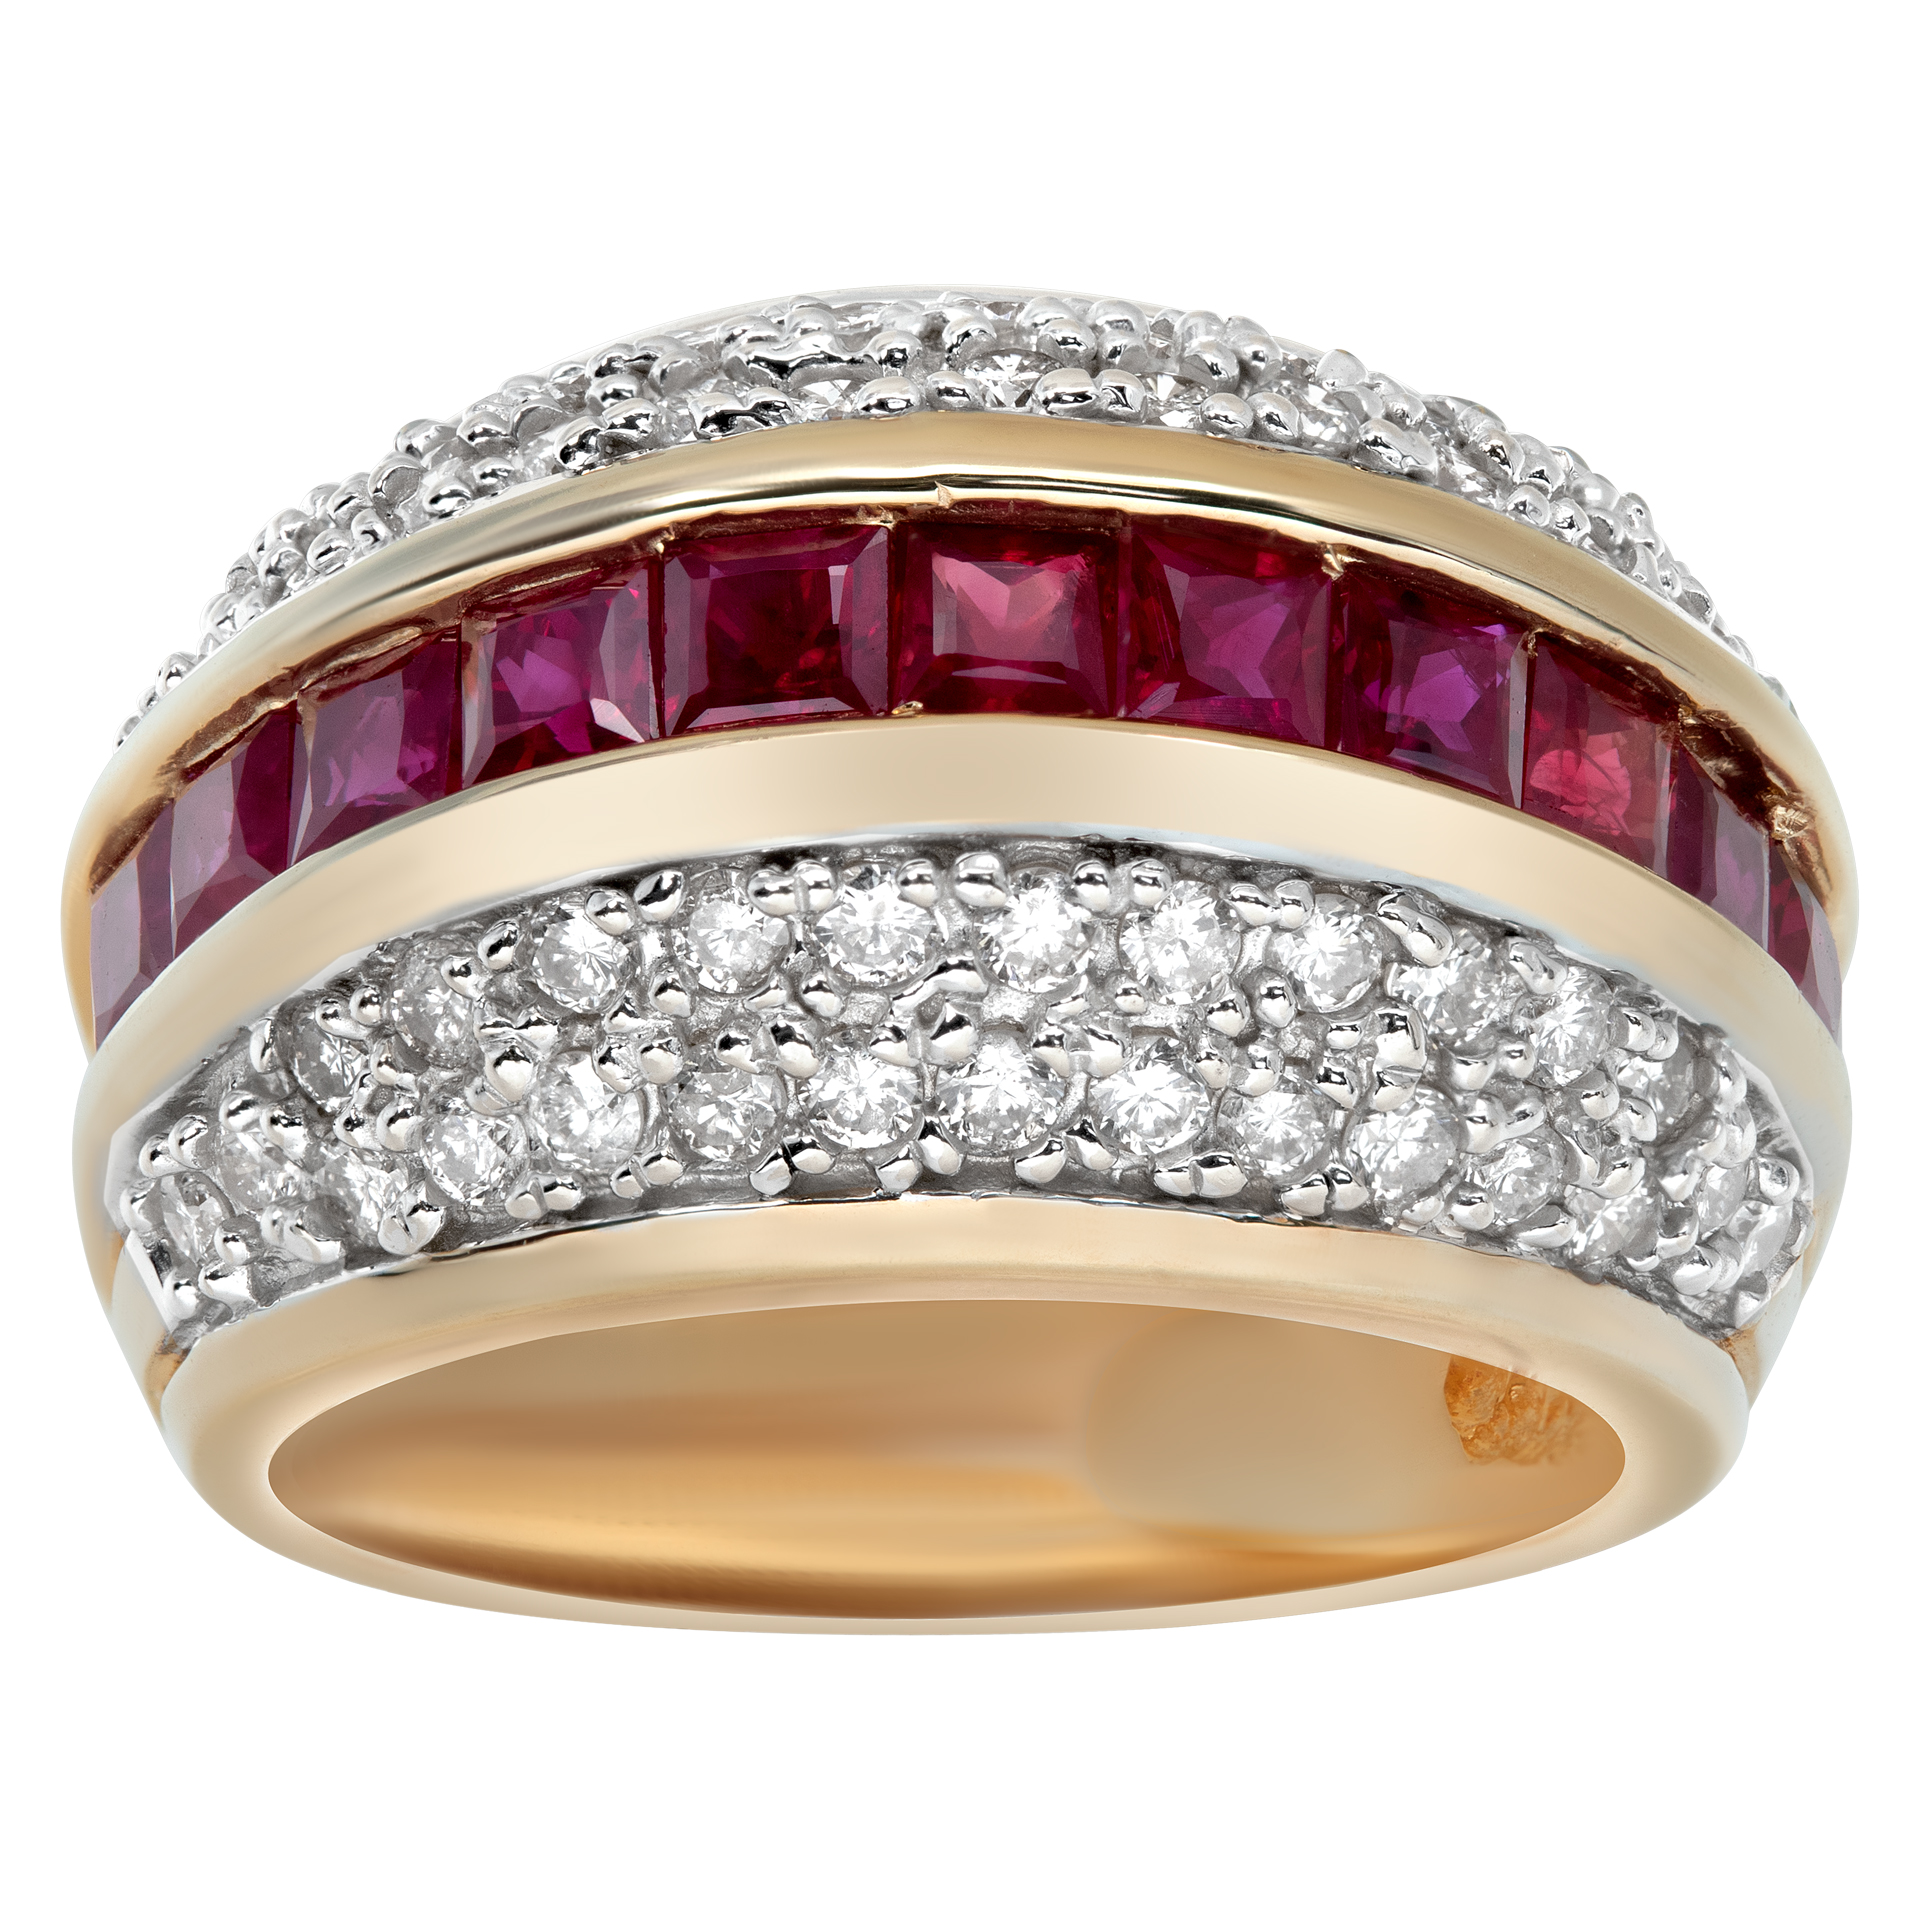 Cuad-row diamond ring with channel set rubies in 14k yellow gold